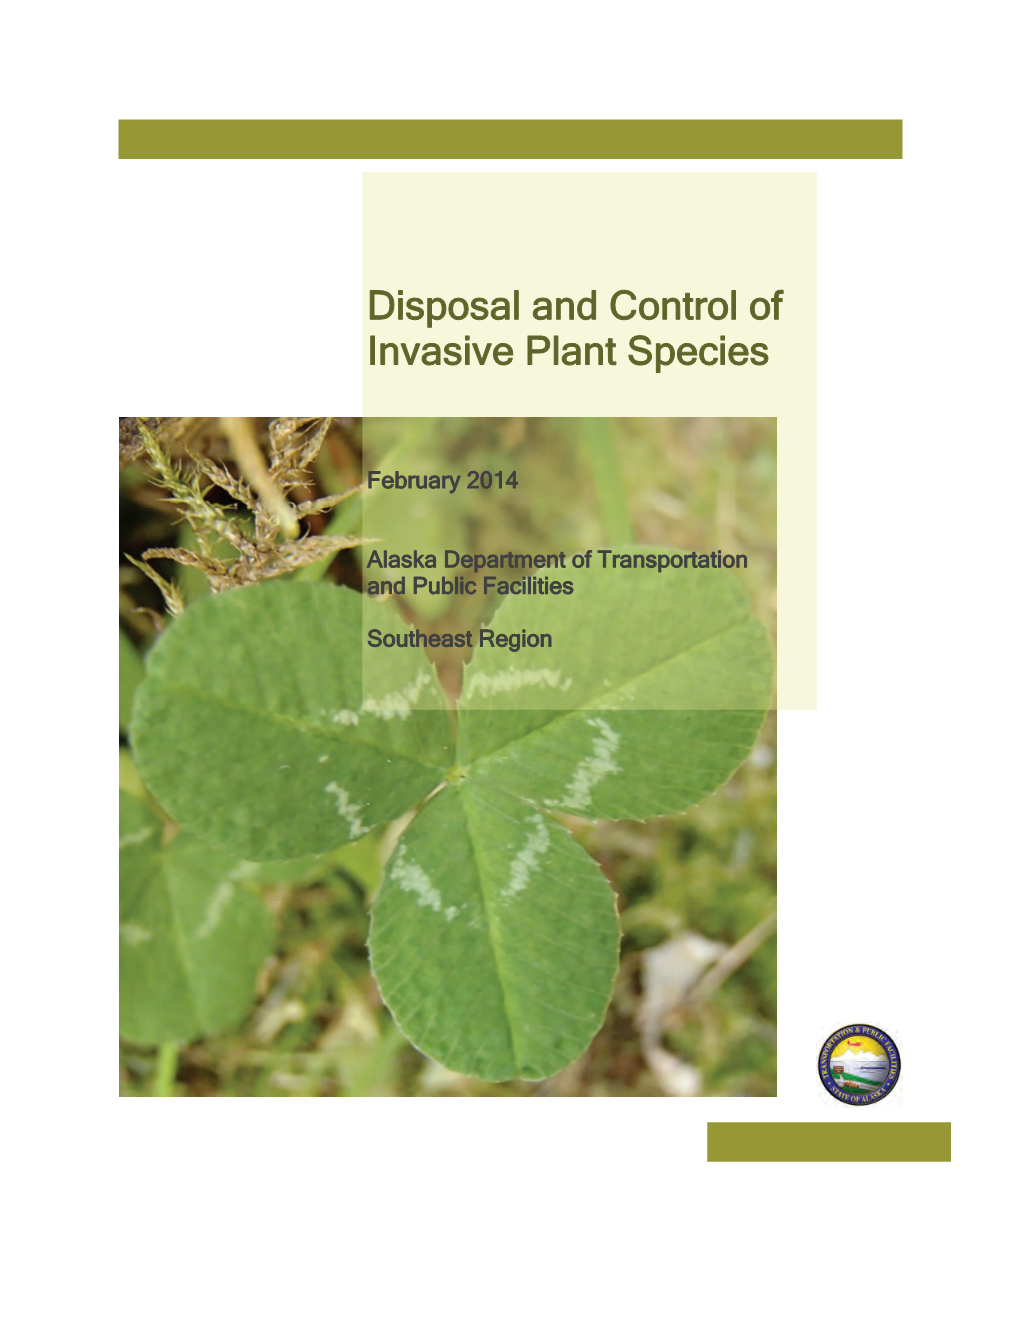 DOT&PF SC Region Disposal and Control of Invasive Plant Species